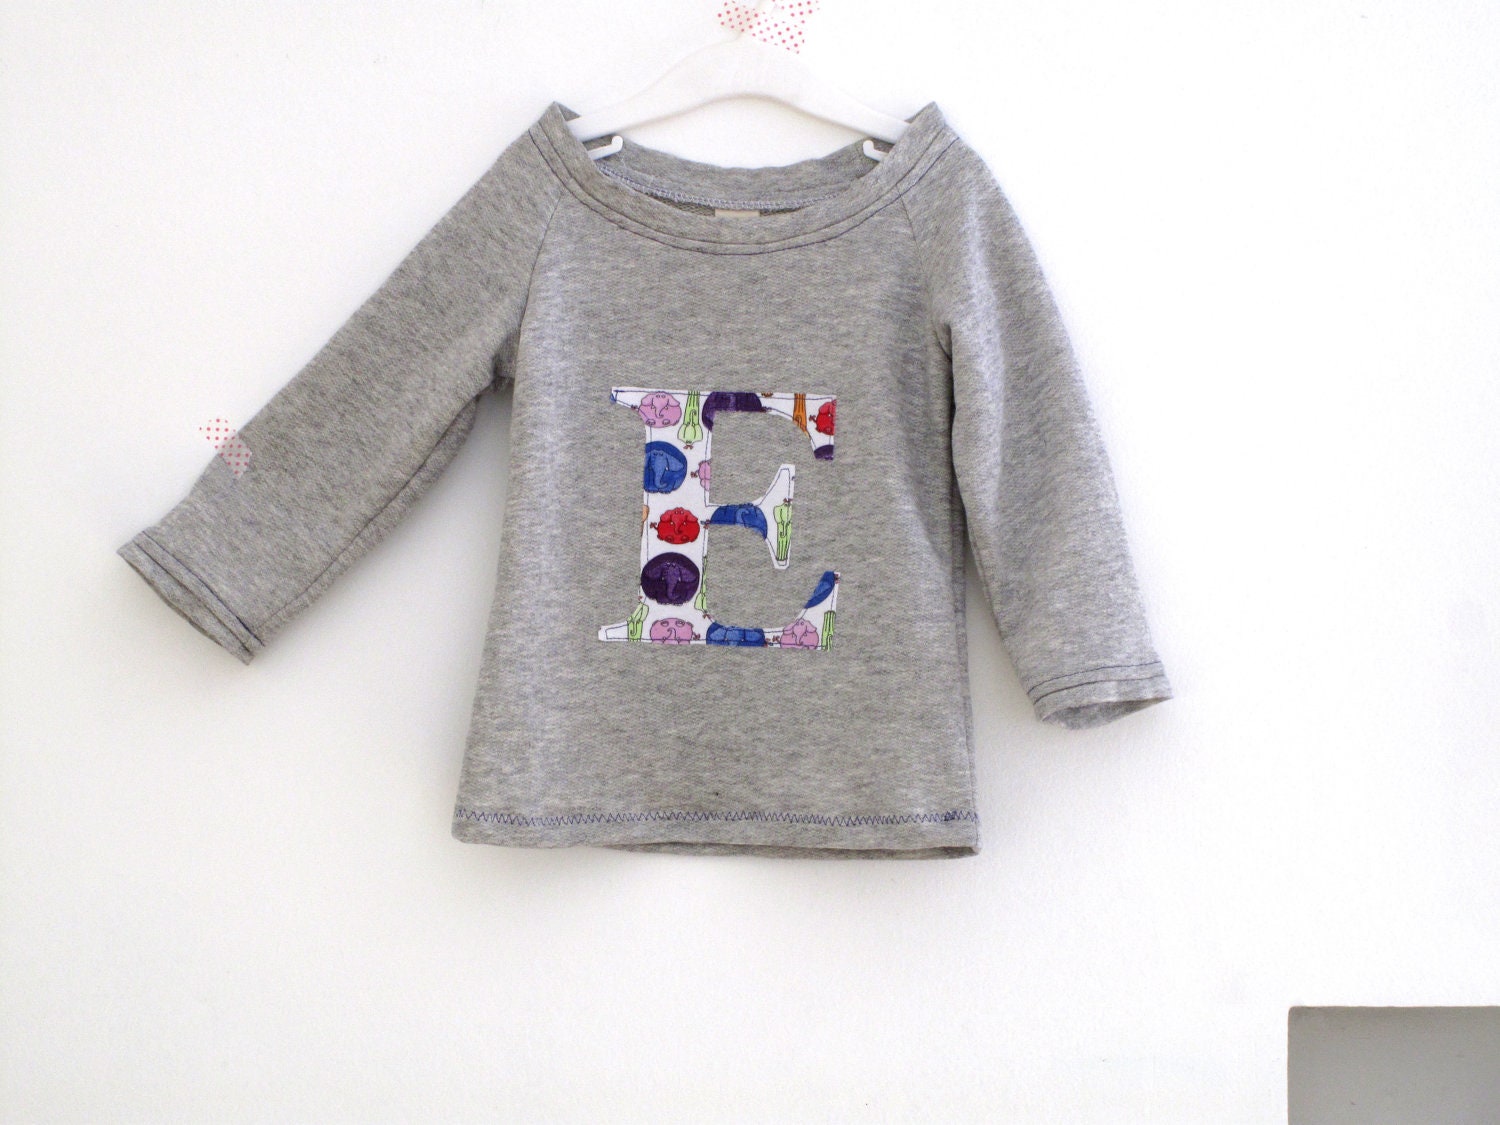 Girl sweatshirt with personalized initial, scoop neck toddler sweater, sport style heather grey sweatshirt. Sizes 3T, 4y, 5y. - arch190